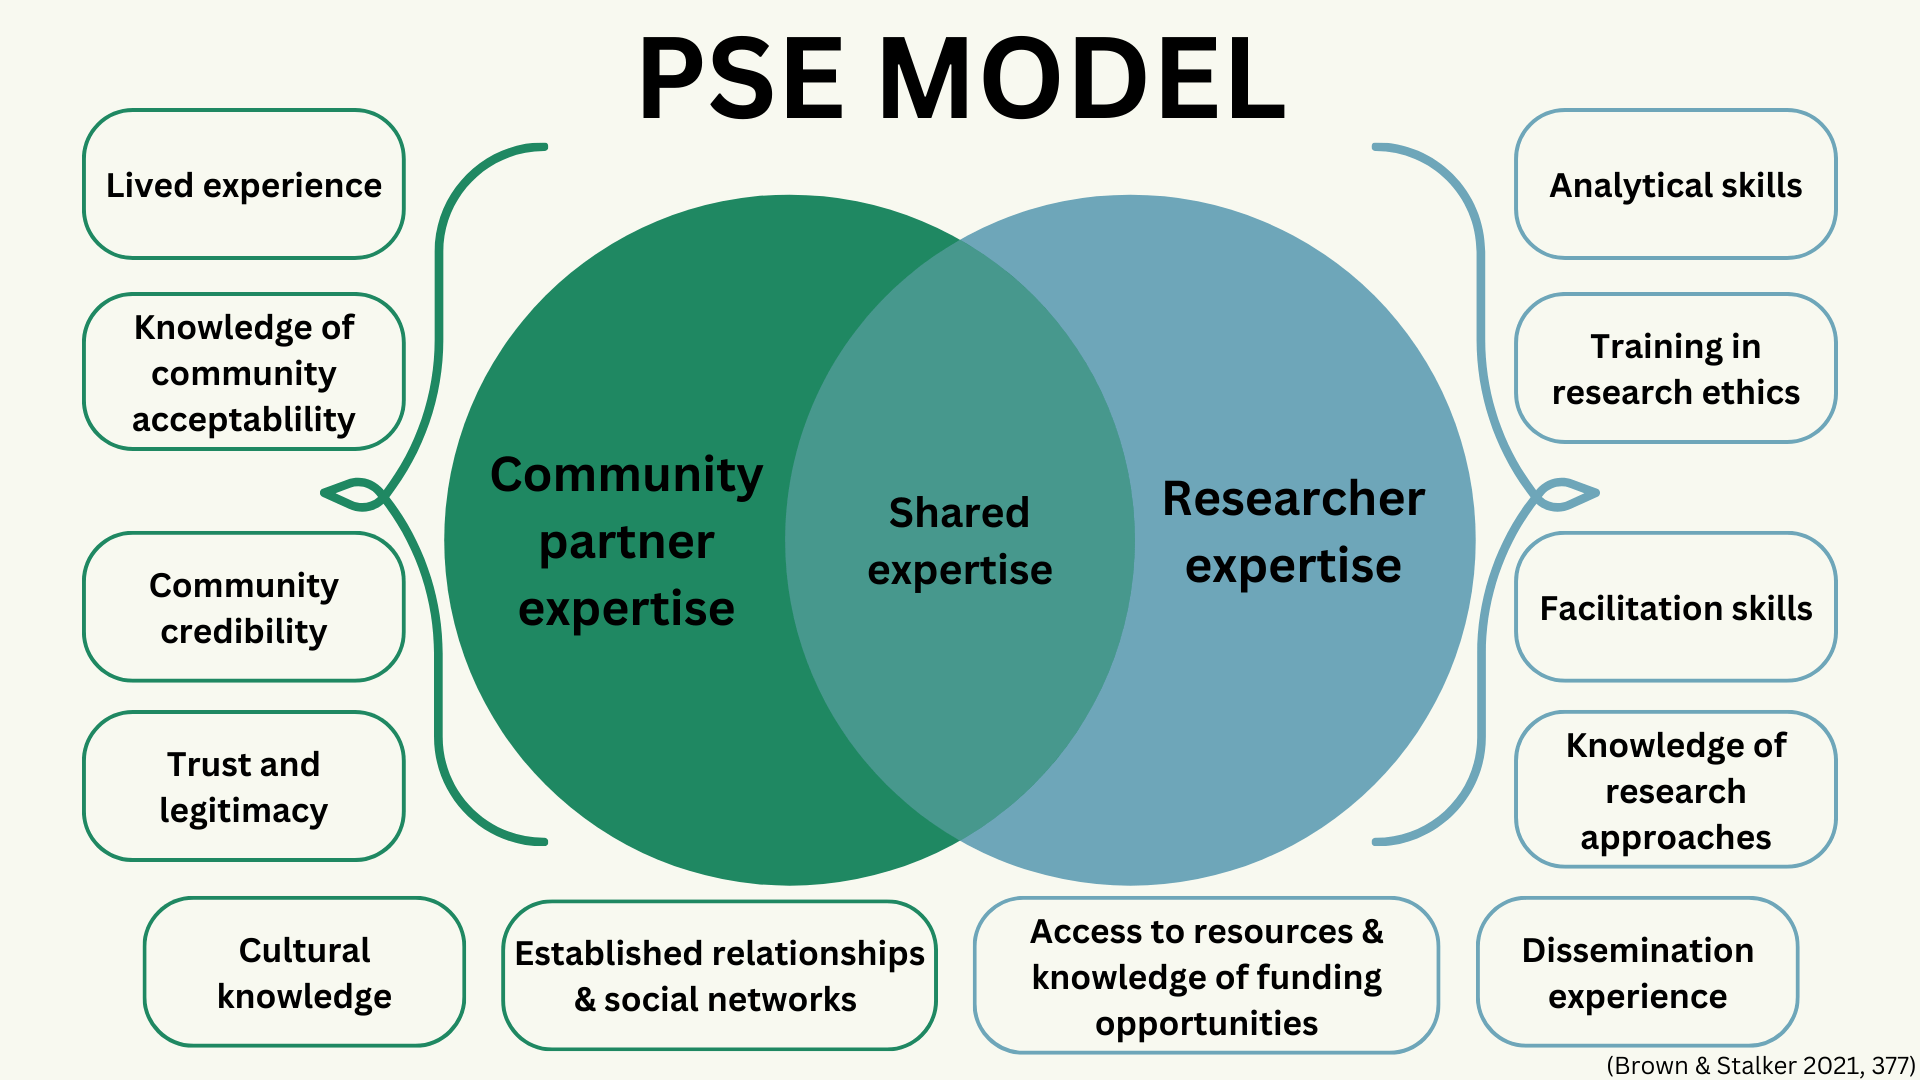 A visual of the PSE model